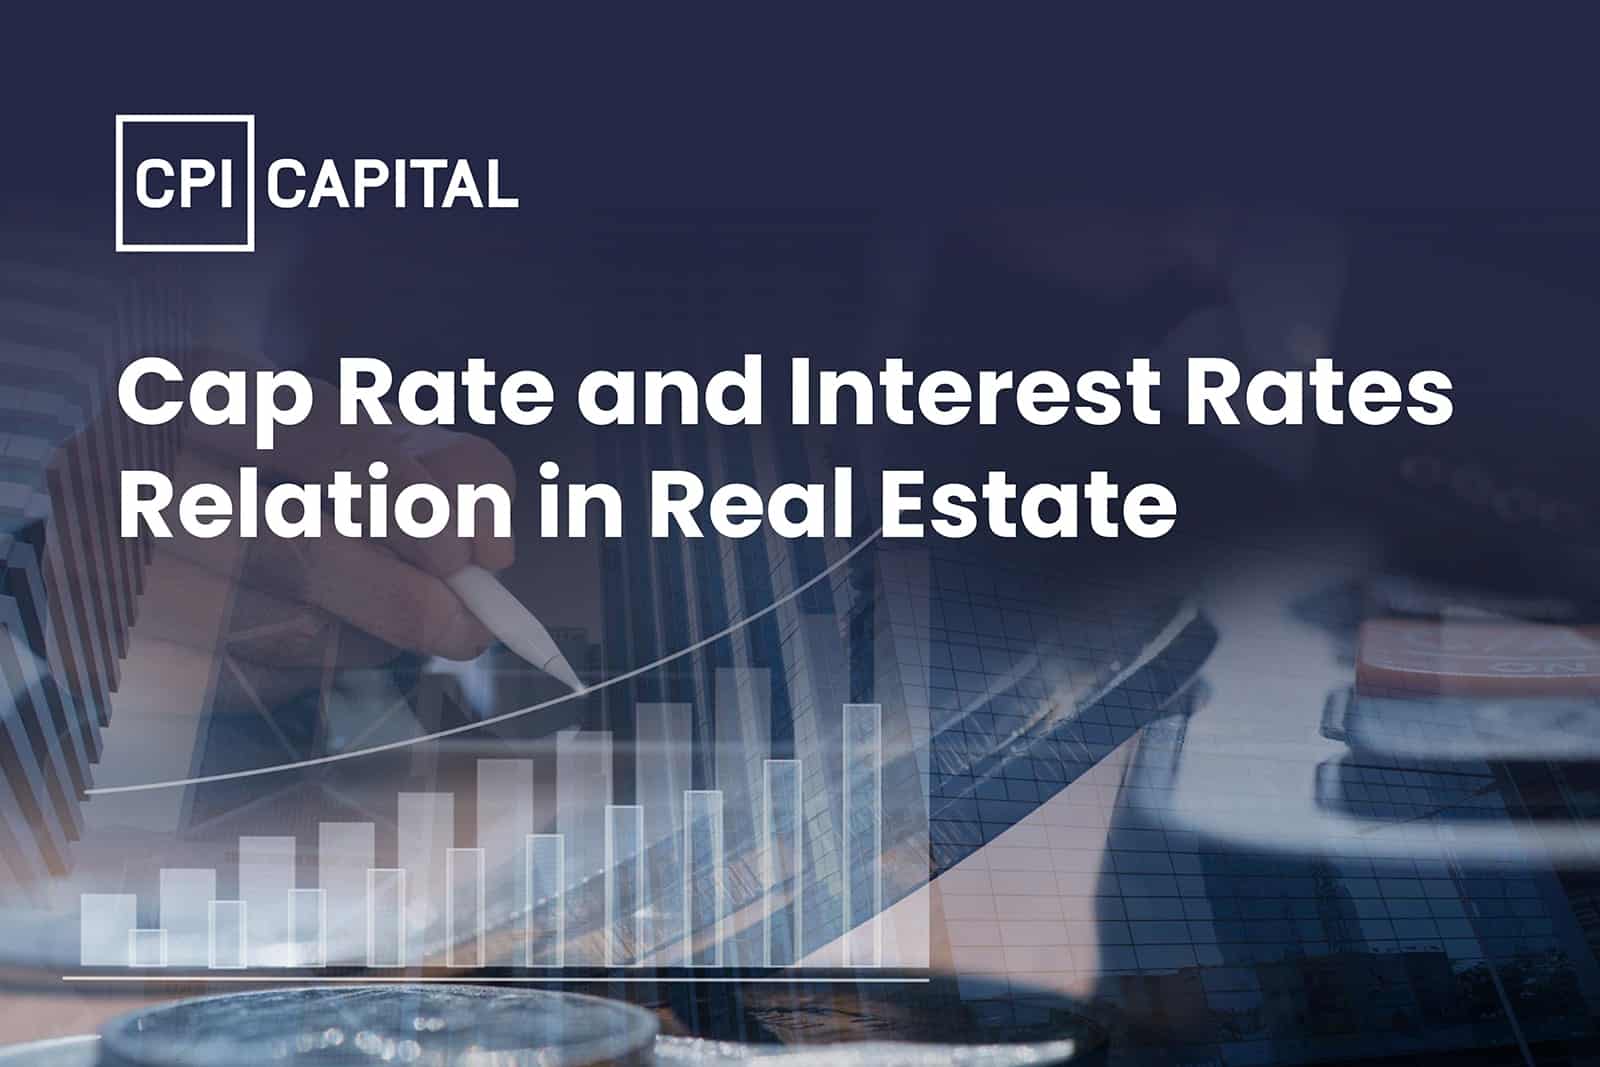 The relationship between Cap Rates and Interest Rates in Real Estate